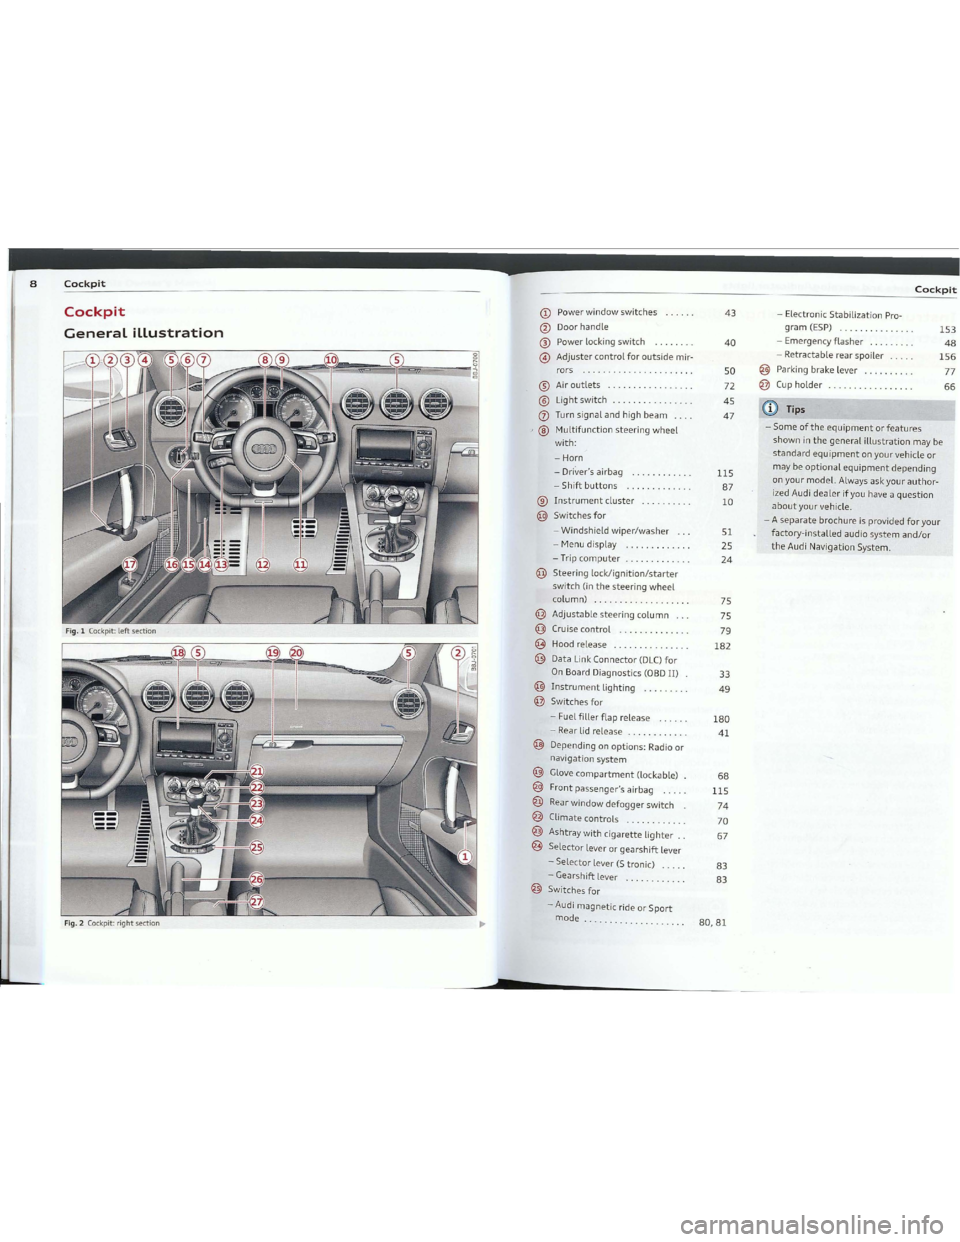 AUDI TT 2012  Owners Manual Downloaded from www.Manualslib.com manuals search engine __......n_
8Cockpit
Cockpit
GeneraLillustration
Fig.lCockpit:leftsection
Fig. 2Cockpit: rightsection
CDPowerwindowswitches
@Doorhandle
®Powerl